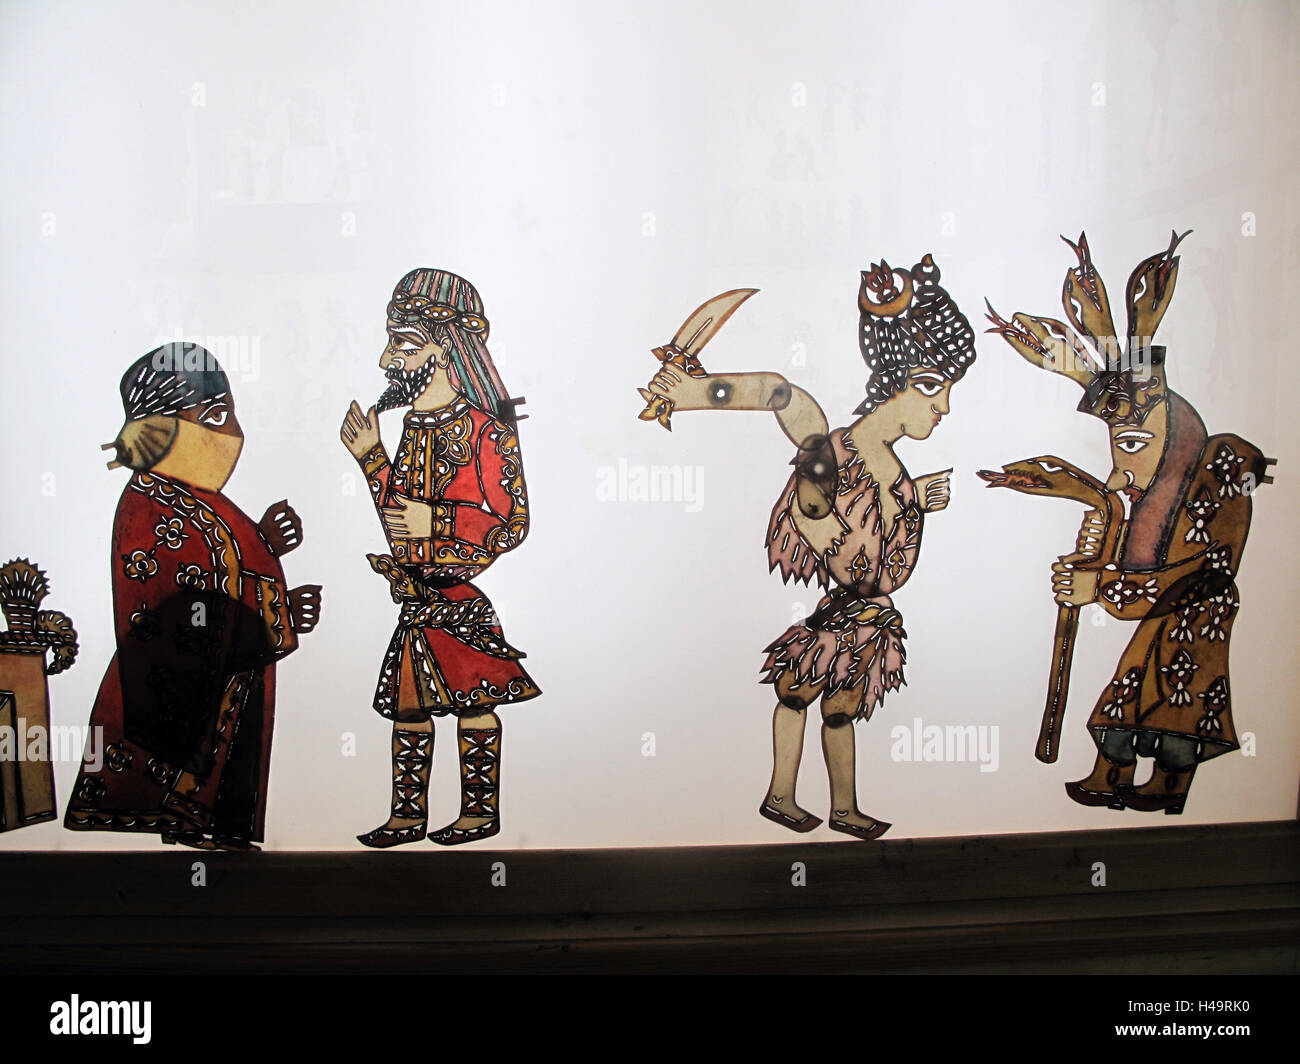 Bursa, Turkey. 2nd Oct, 2016. Karagoz puppets in the Karagoz Museum in Bursa, Turkey, 2 October 2016. The Turkish shadow puppetry, whose protagonist is called Karagoz, was an especially popular entertainment in the Ottoman Empire and was presented in palaces, but also in coffee houses. The main figures are Karagoz, a rough and shrewd man from the working class, and his arrogant neighbour Hacivat, the educated townsman. PHOTO: CONSTANZE LETSCH/dpa/Alamy Live News Stock Photo